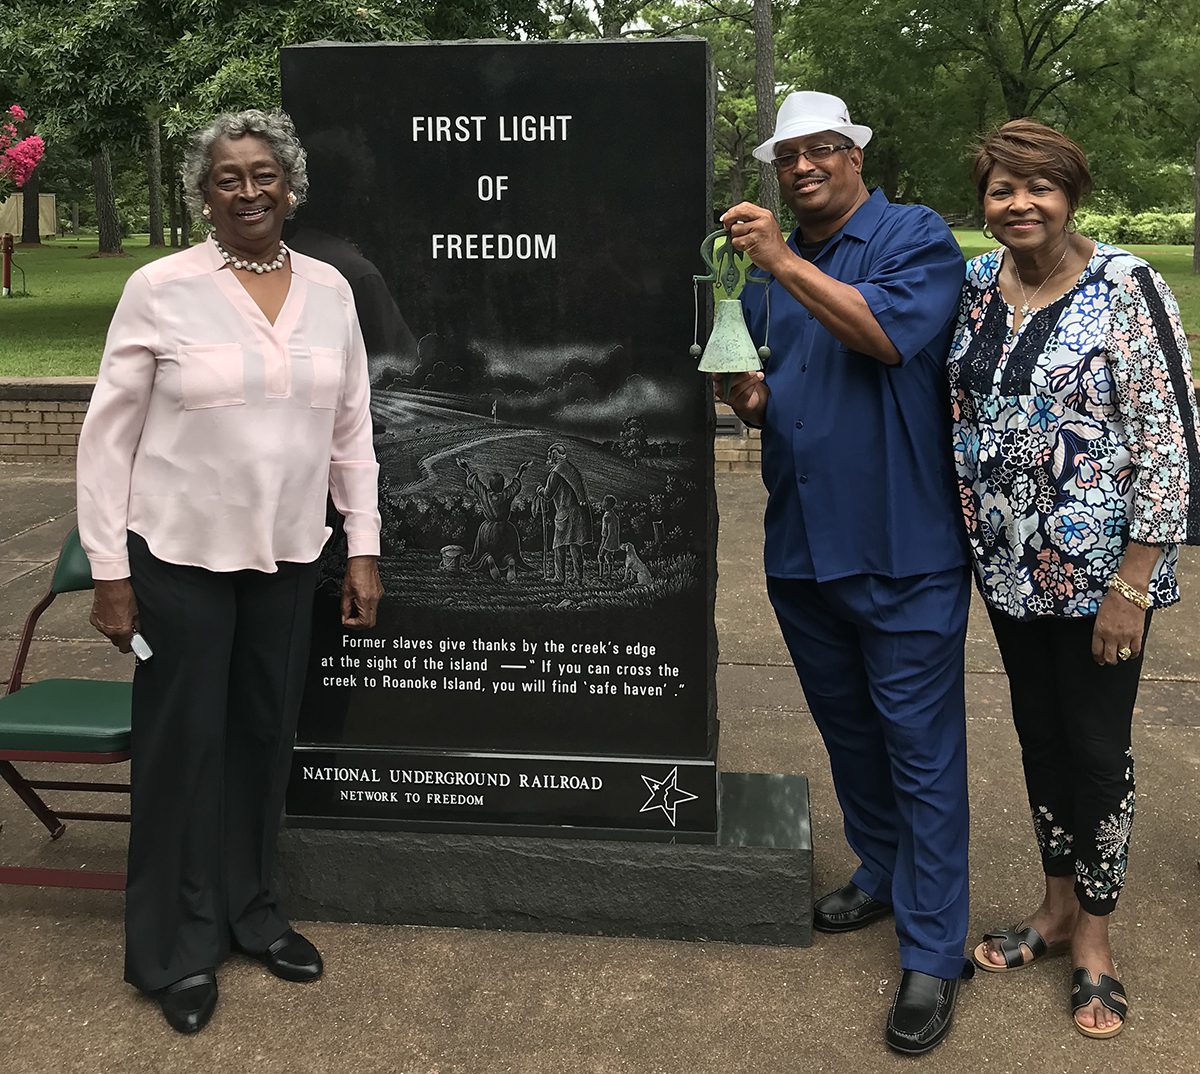 The late Virginia Tillett, left, a former Dare County commissioner and a descendant of the colony, poses with family members next to the granite monument at its dedication in 2019. Photo: Catherine Kozak